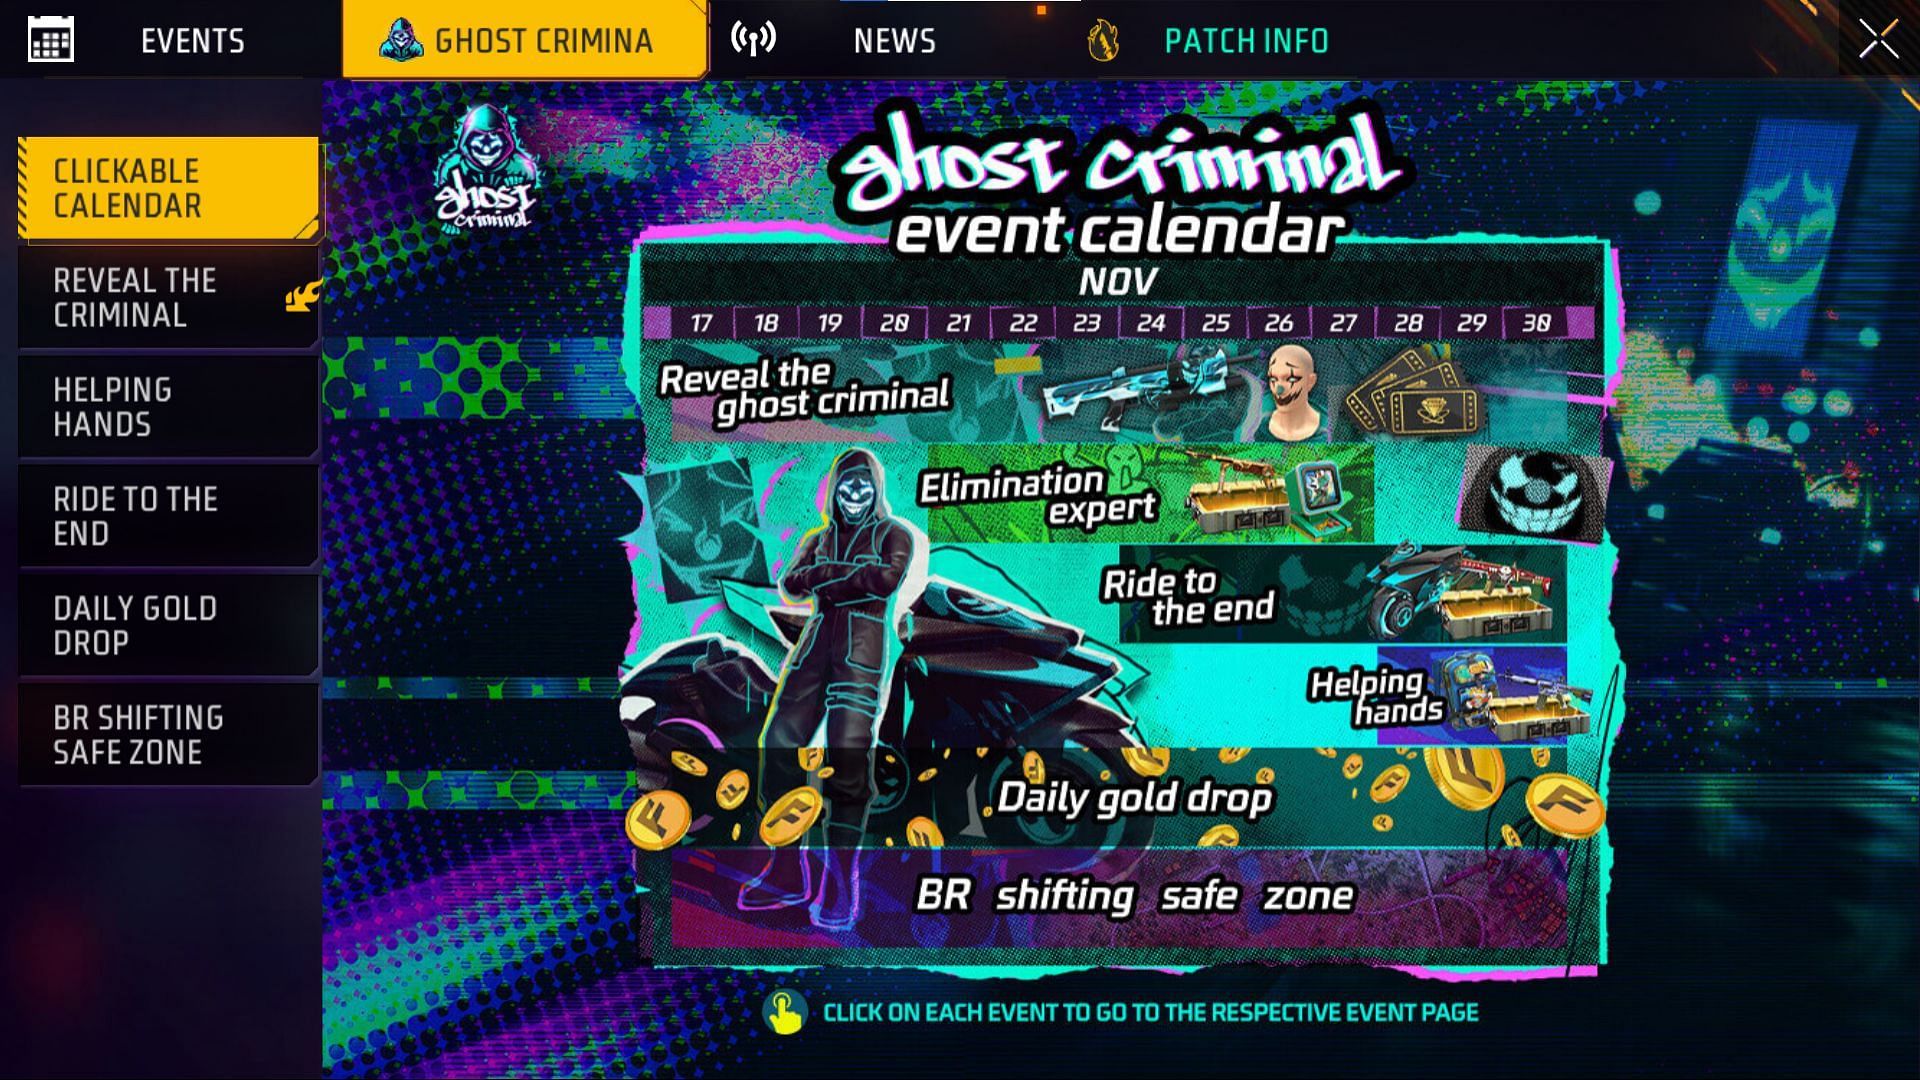 Here is the calendar of the Ghost Criminal events (Image via Garena)